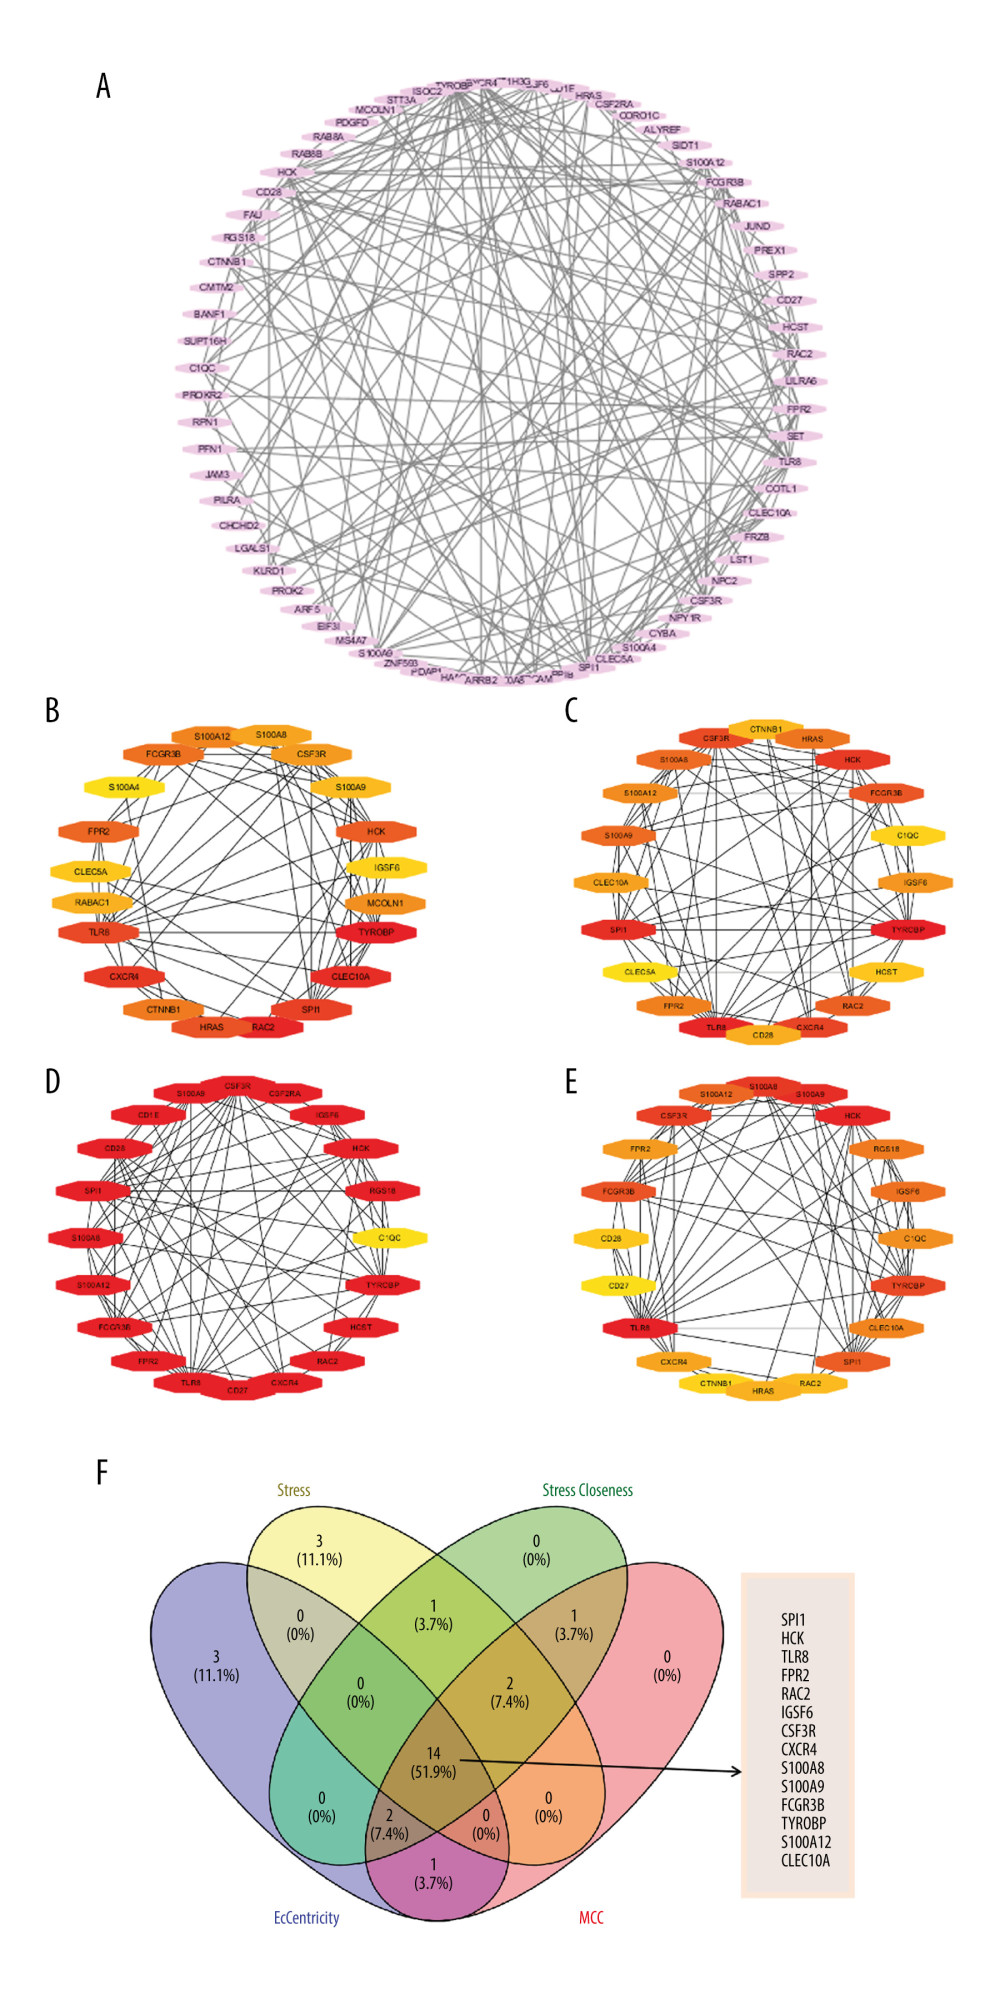 (A) Protein–protein interaction (PPI) networks of the differentially expressed genes (DEGs). The top 20 genes in cytoHubba plugins: (B) Stress, (C) Closeness, (D) EcCentricity, and (E) MCC. (F) Venn diagrams of the top 20 genes.